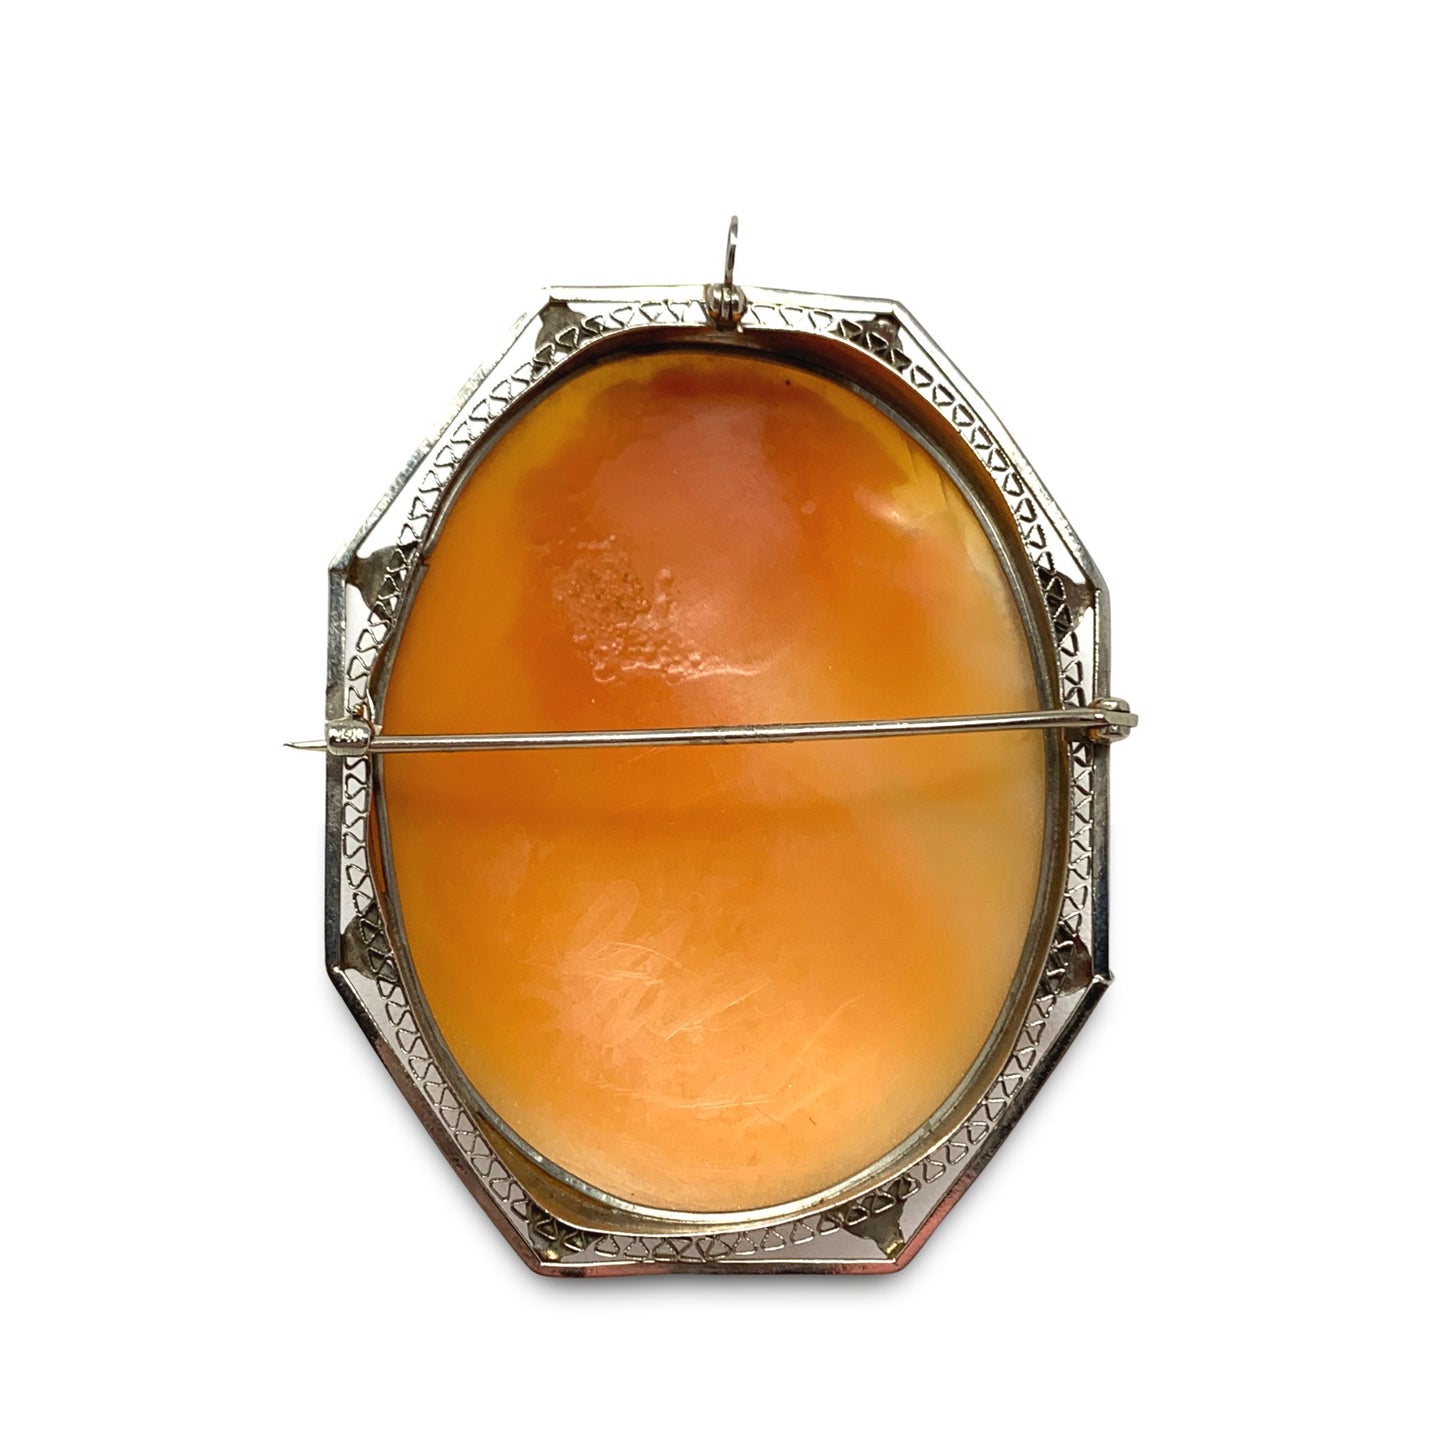 14K Gold Large Antique Cameo Brooch/ Pendant